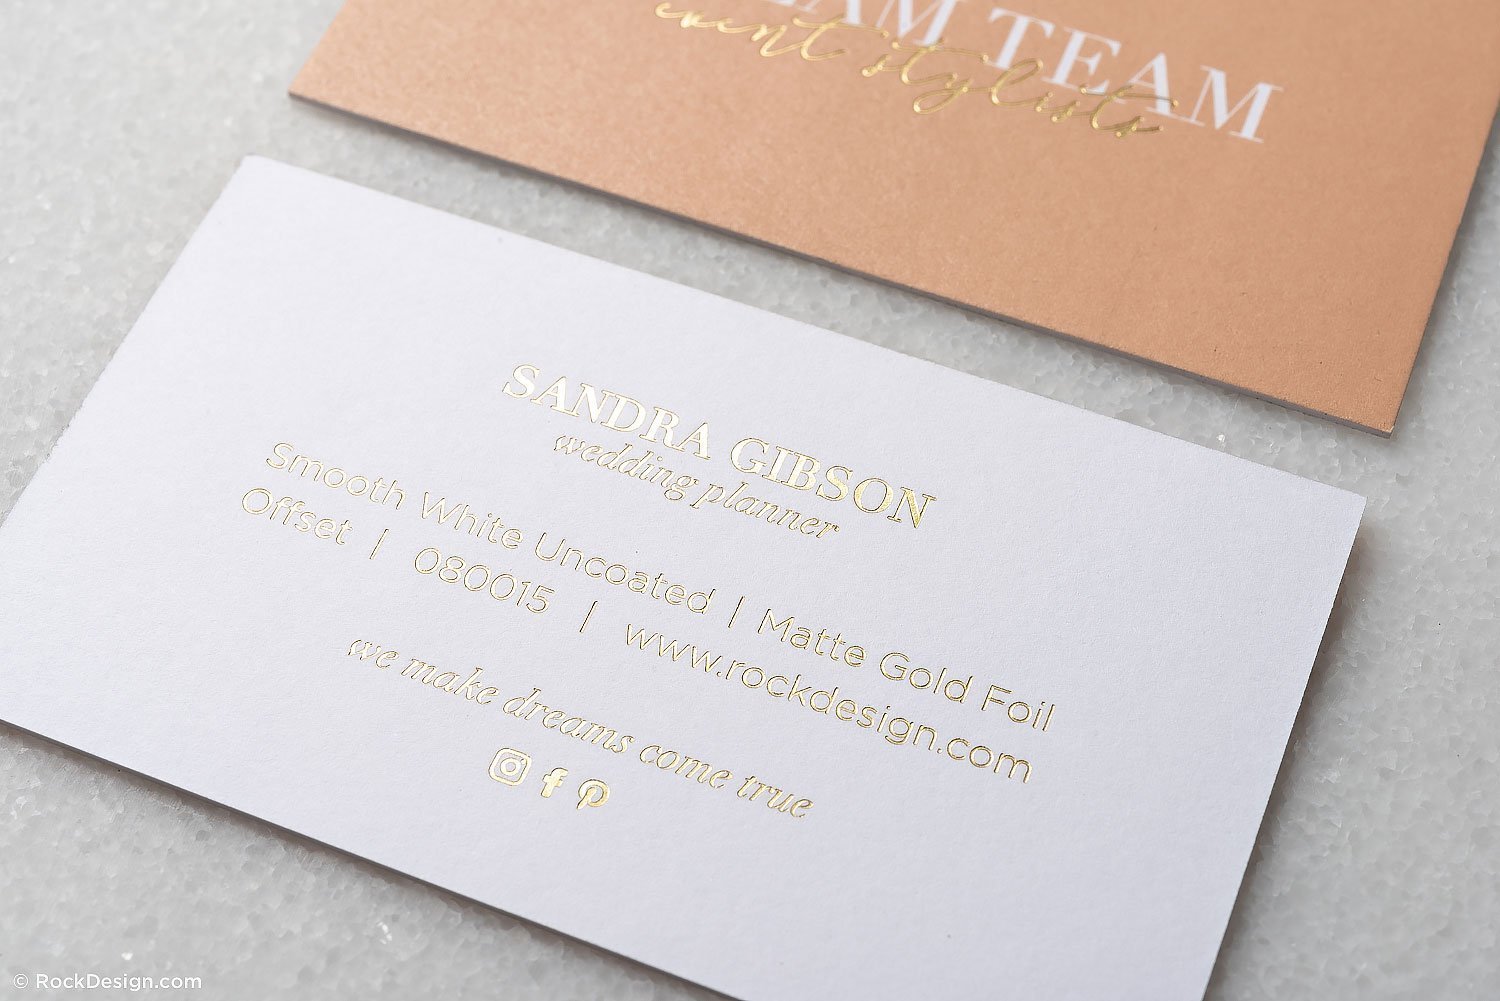 Elegant event planner business cards with gold foil printing - Dream Team